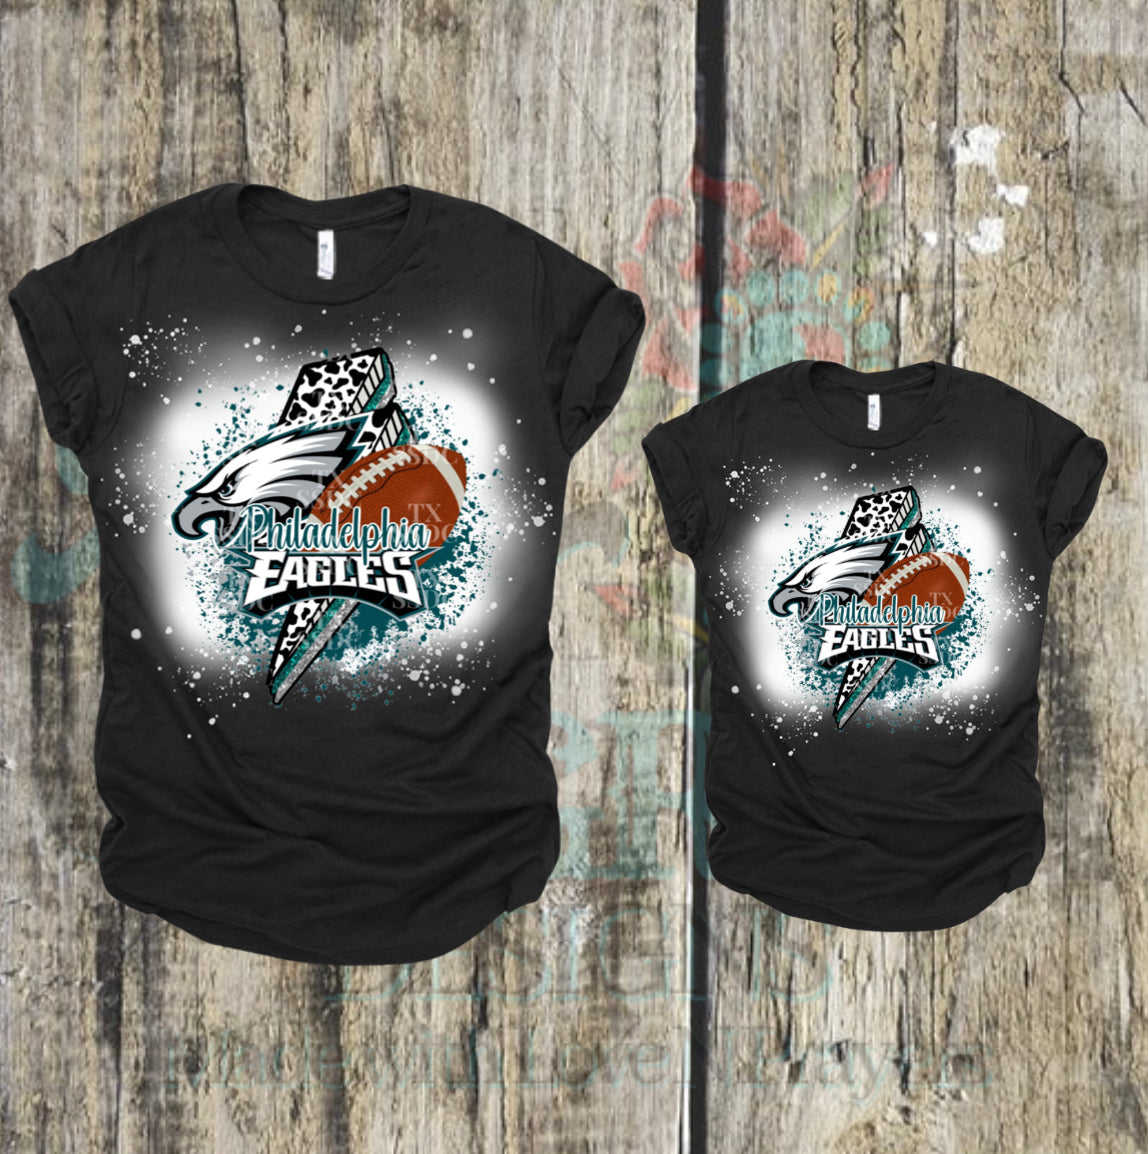 Philly Eagles Kids Sizes